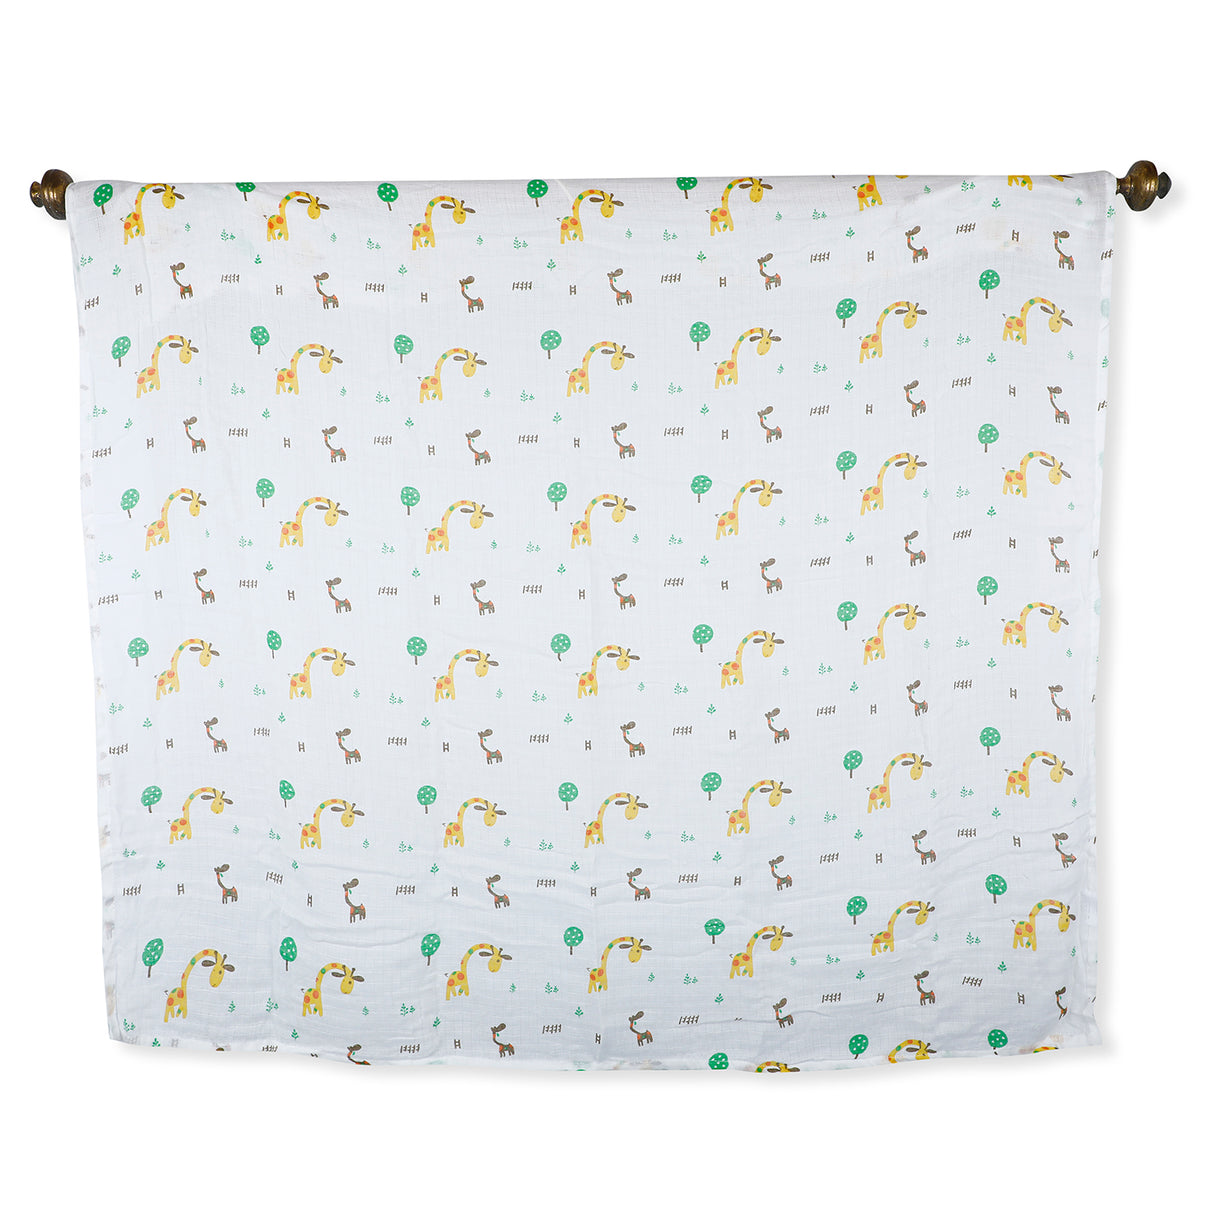 2 Layer Soft Breathable Muslin Cotton Swaddle